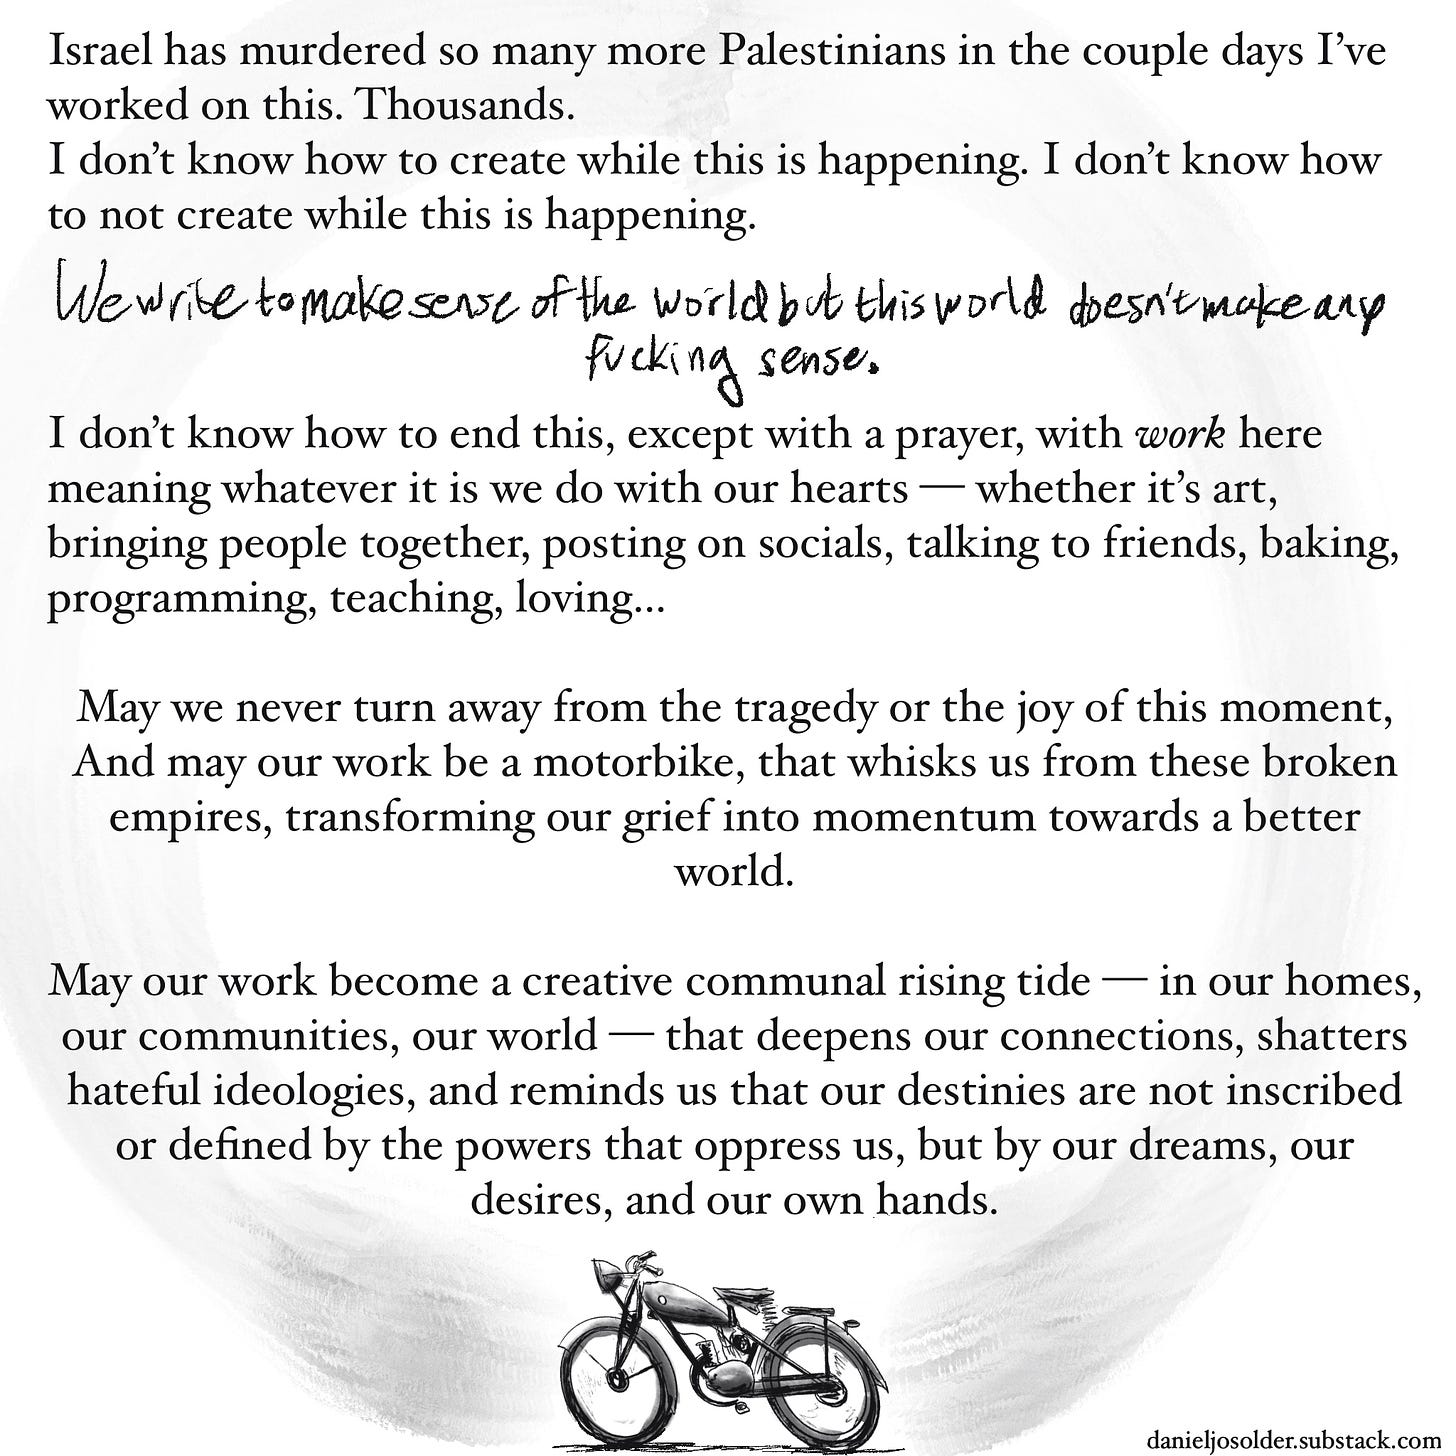 Israel has murdered so many more Palestinians in the couple of days I've worked on this. thousands. I don't know how to create while this is happening. I don't know how to not create while this is happening. We write to make sense of the world but this world doesn't make any fucking sense. I don't know how to end this, except with a prayer, with work here meaning whatever it is we do with our hearts— whether it's art, bringing people together, posting on socials, talking to friends, baking, programming, teaching, loving…  May we never turn away from the tragedy or the joy of this moment and may our work be a motorbike that whisks us from these broken empires, transforming our grief into momentum towards a better world.May our work become a creative communal rising tide— in our homes, our communities, our world— that deepens our connections, shatters hateful ideologies, and reminds us that our destinies are not inscribed or defined by the powers that oppress us, but by our dreams, our desires, and our own hands. Image description: drawing of a motorbike at the bottom of the page.